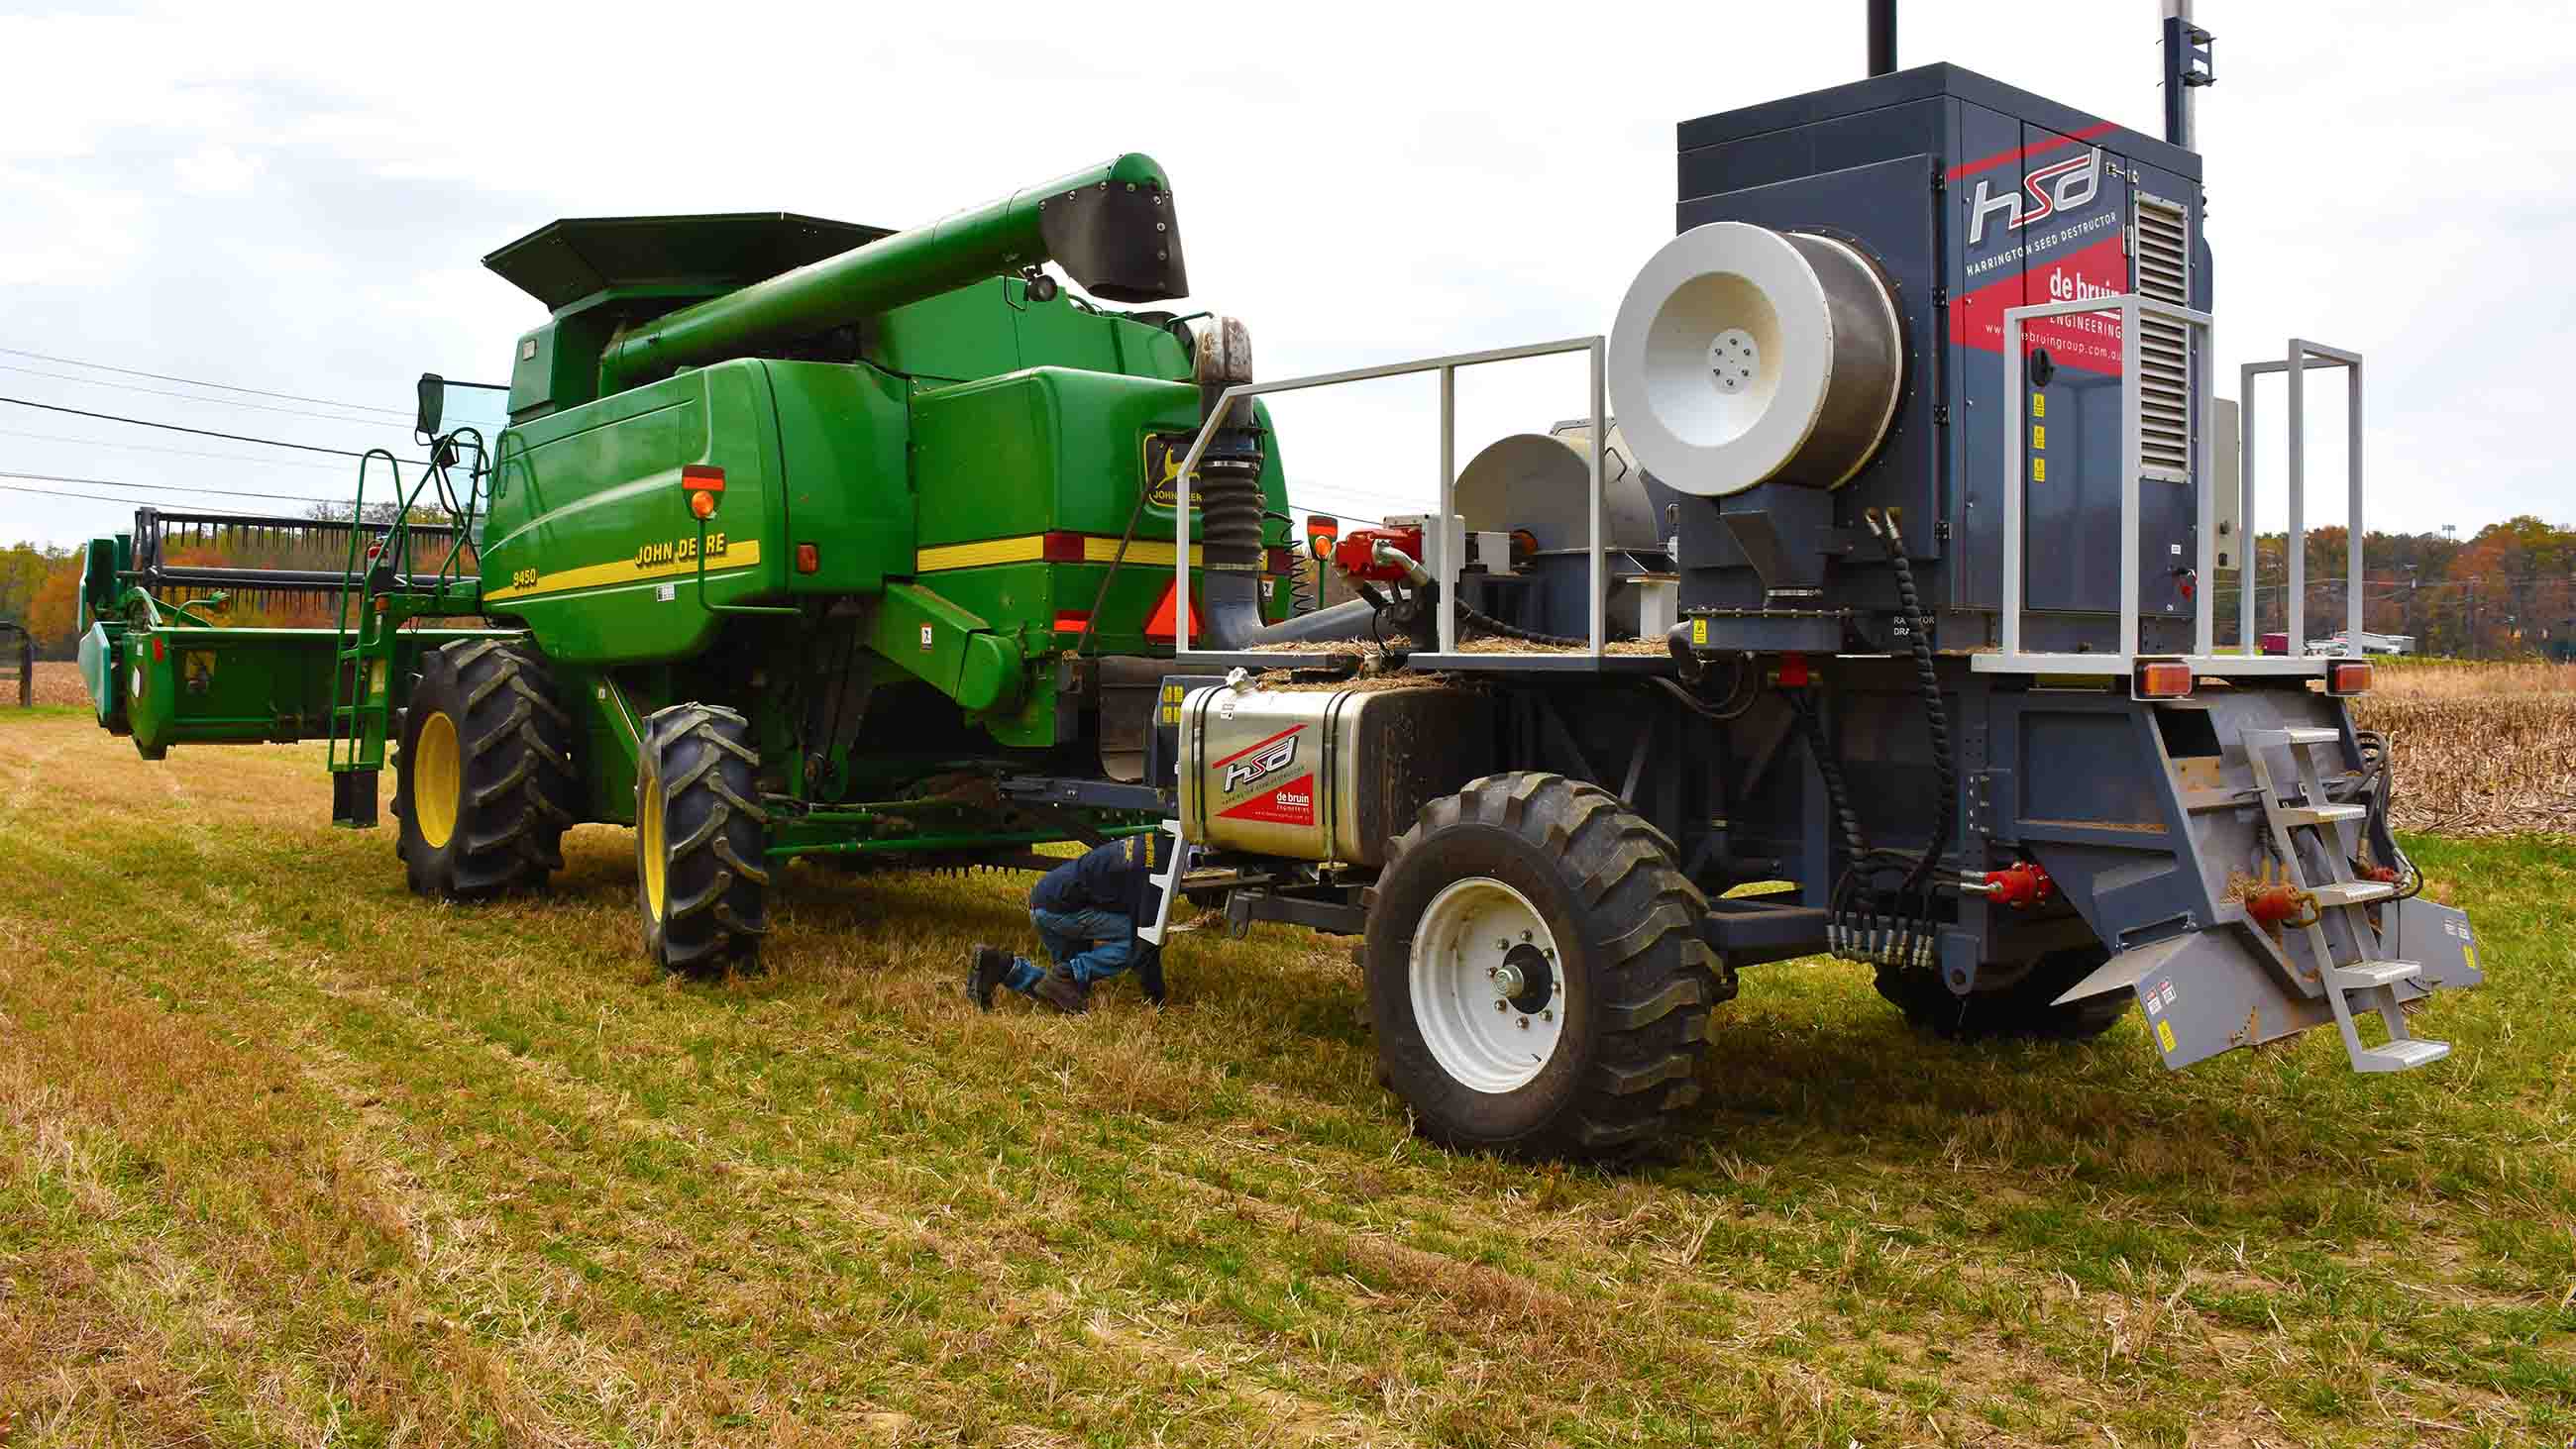 The Harrington Seed Destructor attached to the rear of a combine, in preparation for soybean harvest.